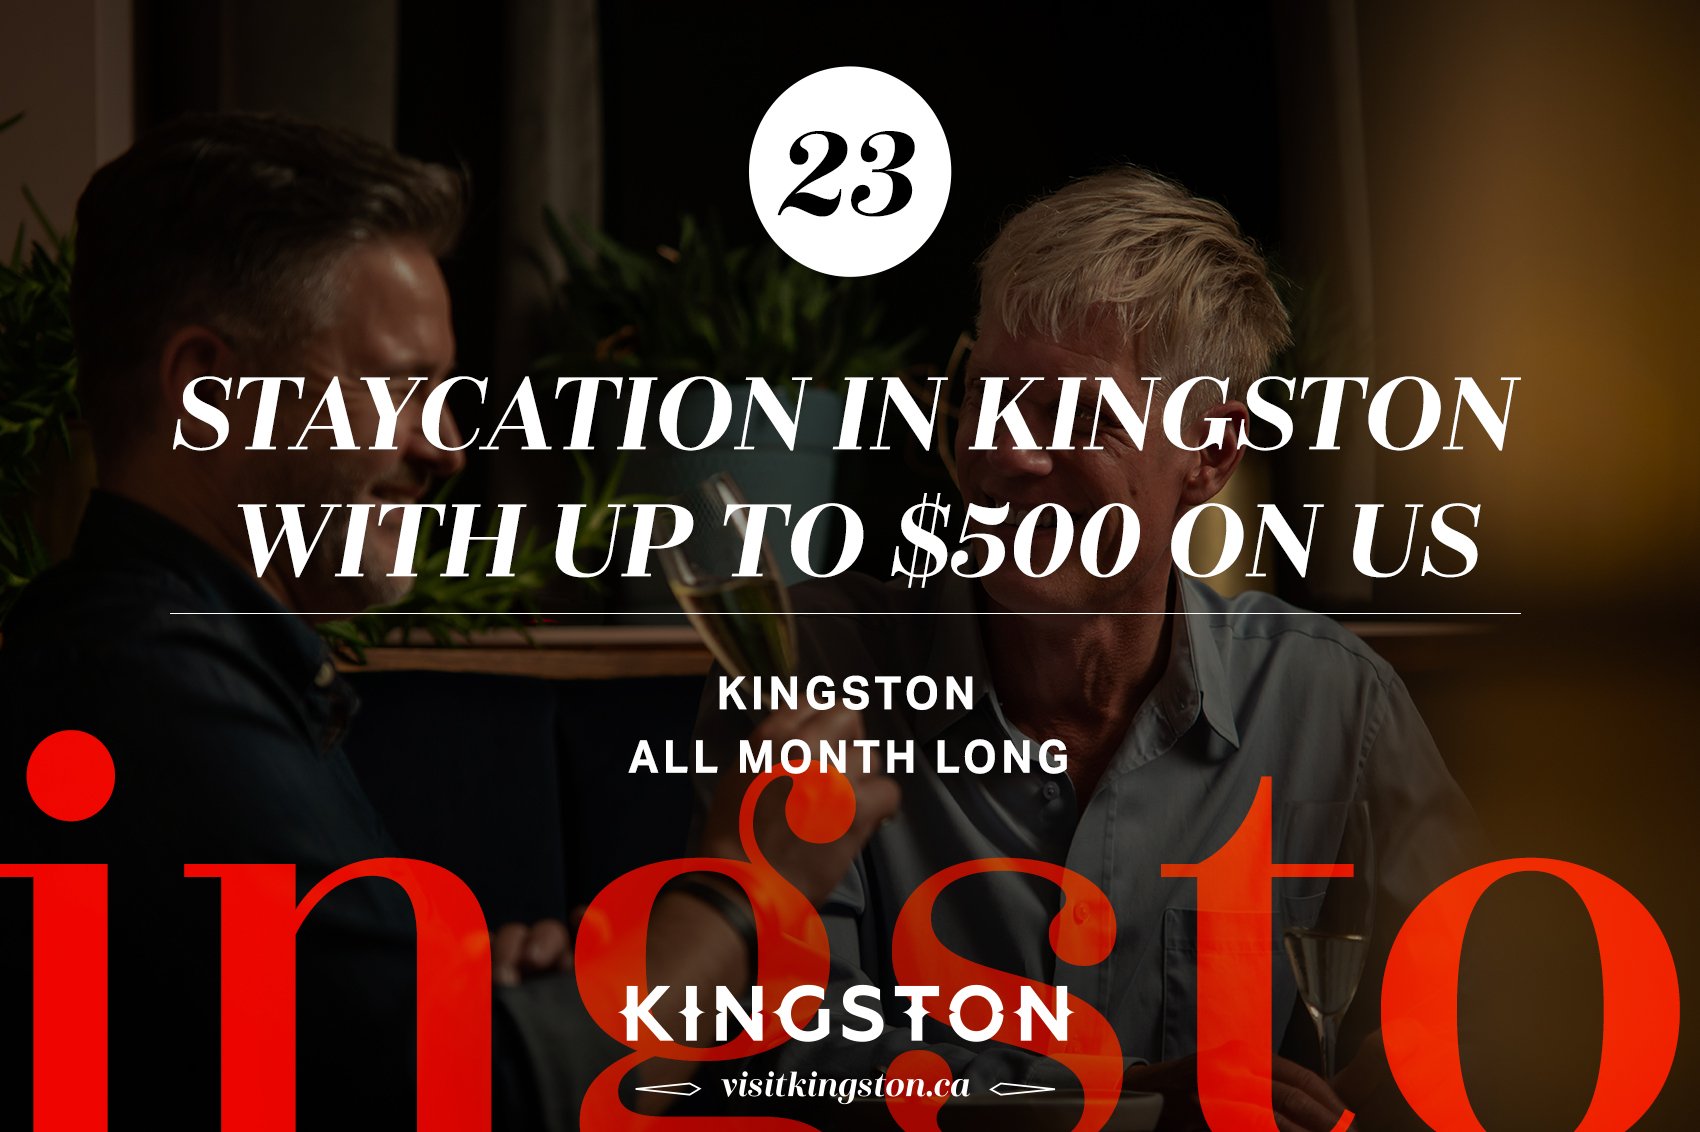 Staycation in Kingston with up to $500 on us